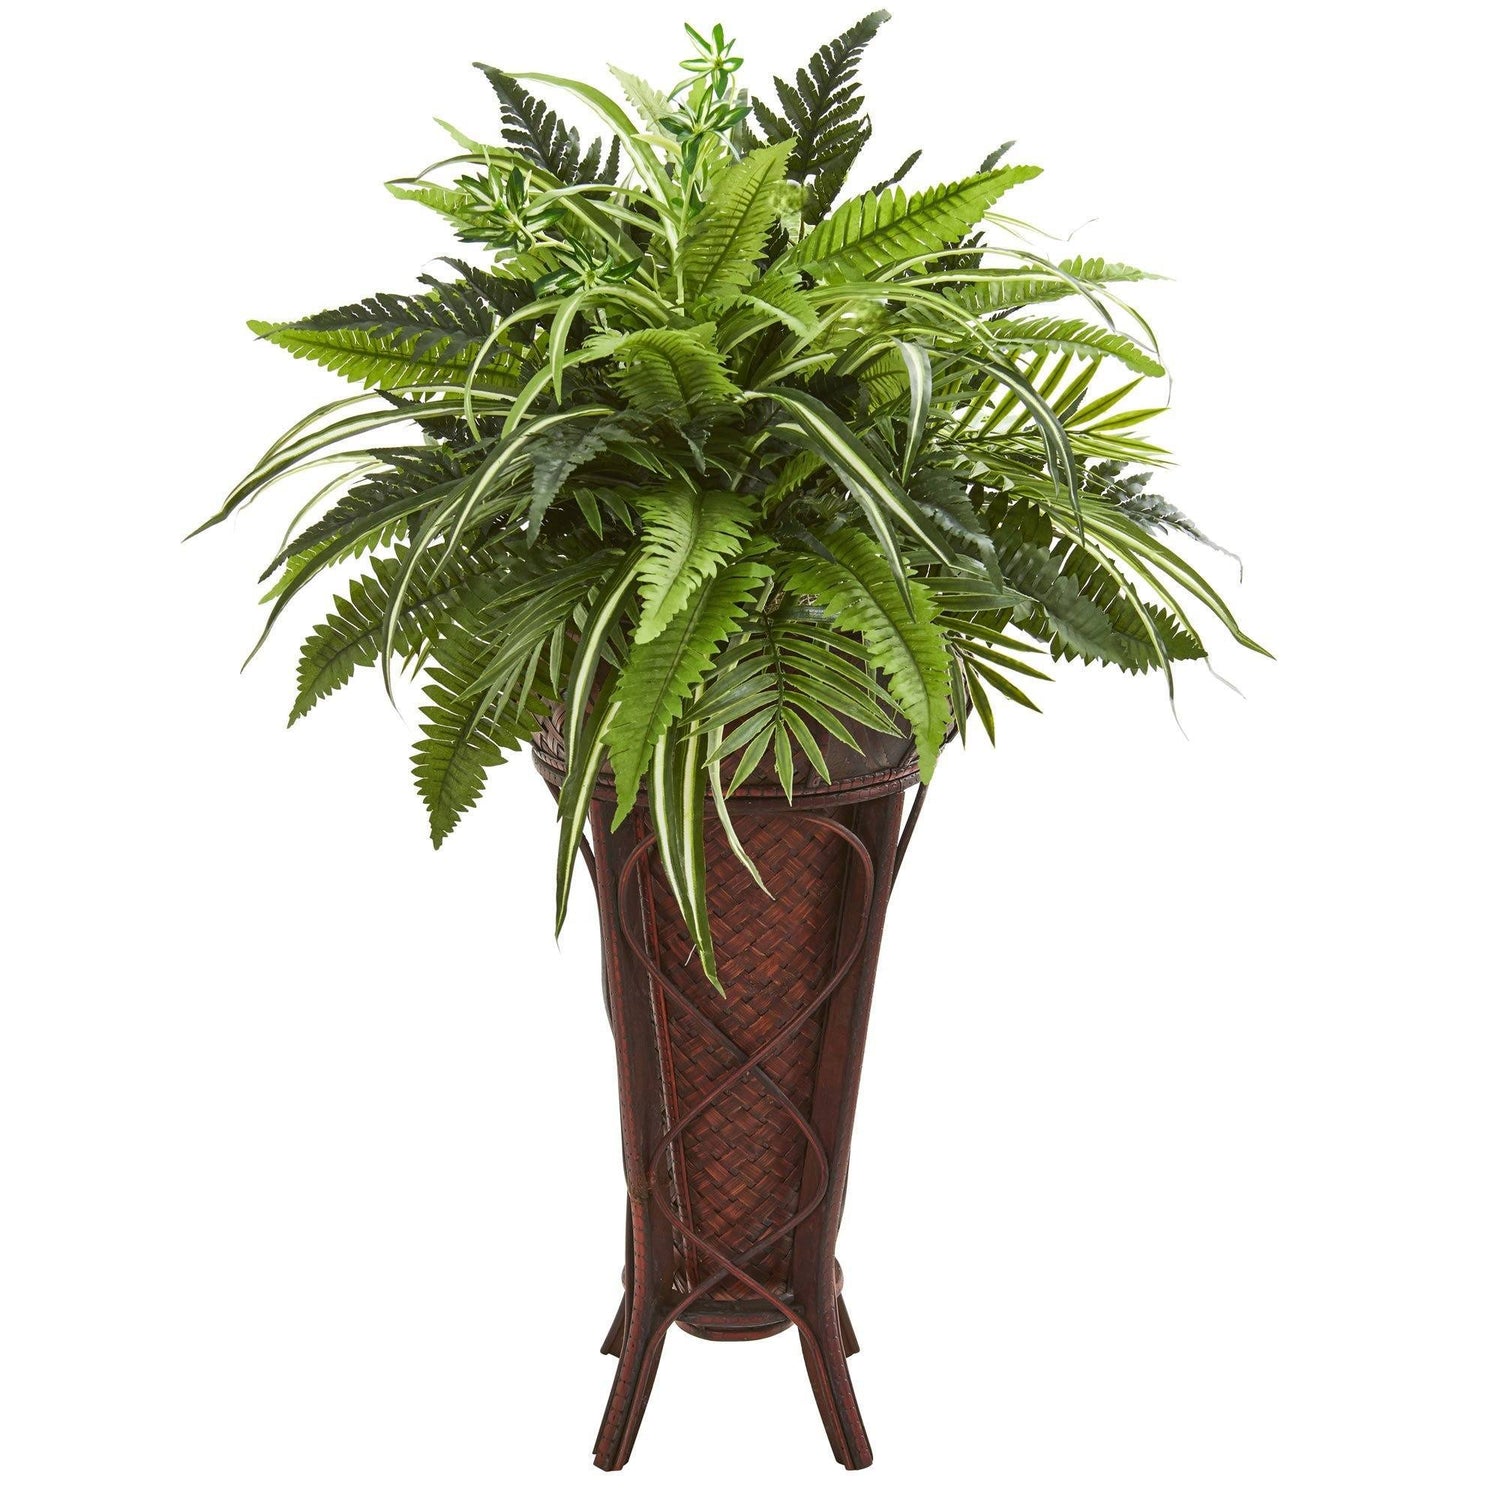 32” Mixed Greens and Fern Artificial Plant in Decorative Stand